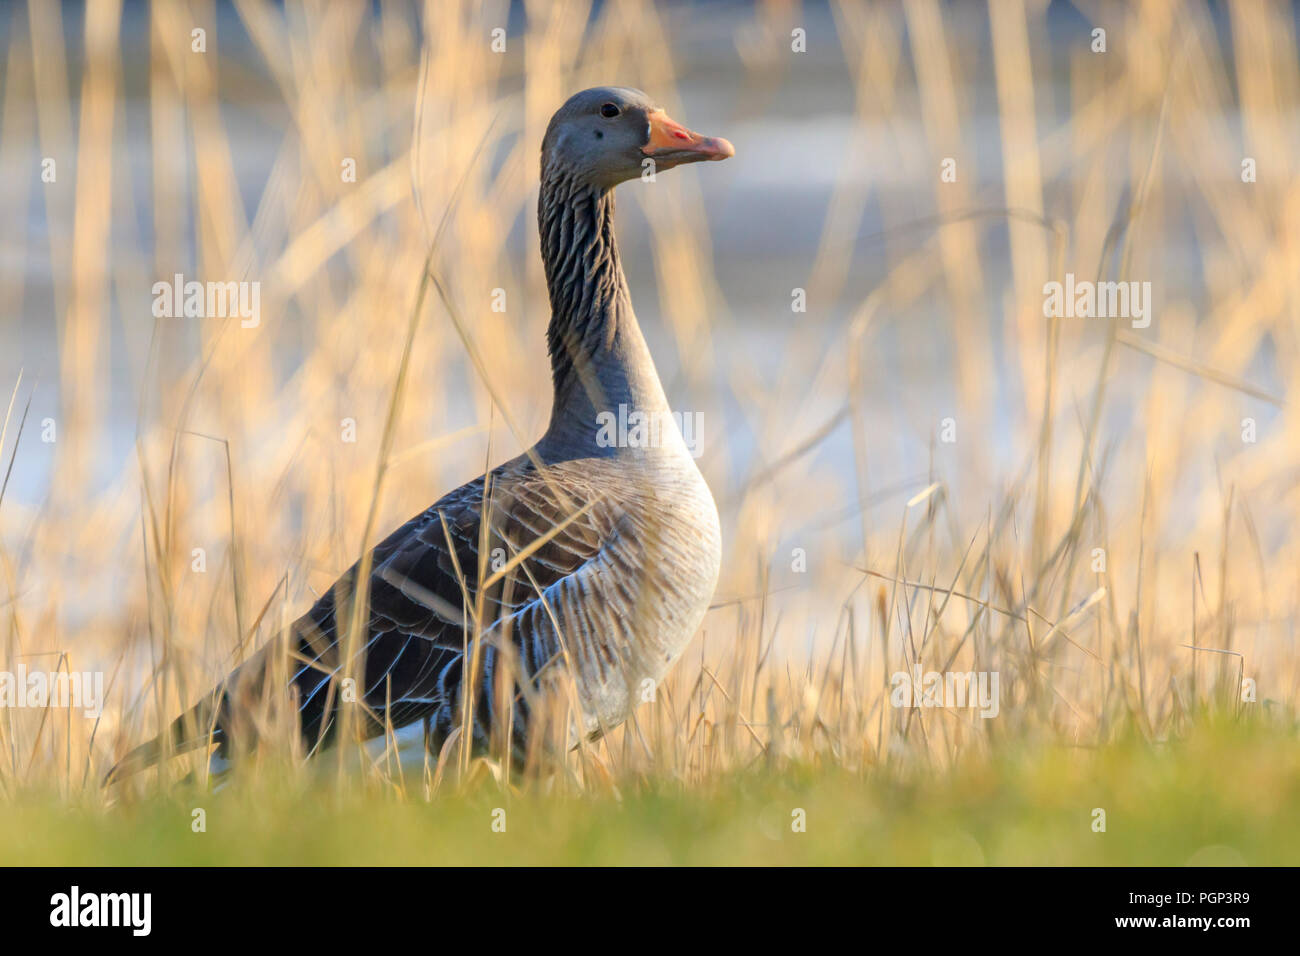 Greylag goose (Anser anser) resting in a meadow enjoying the warm sunlight during Springtime Stock Photo